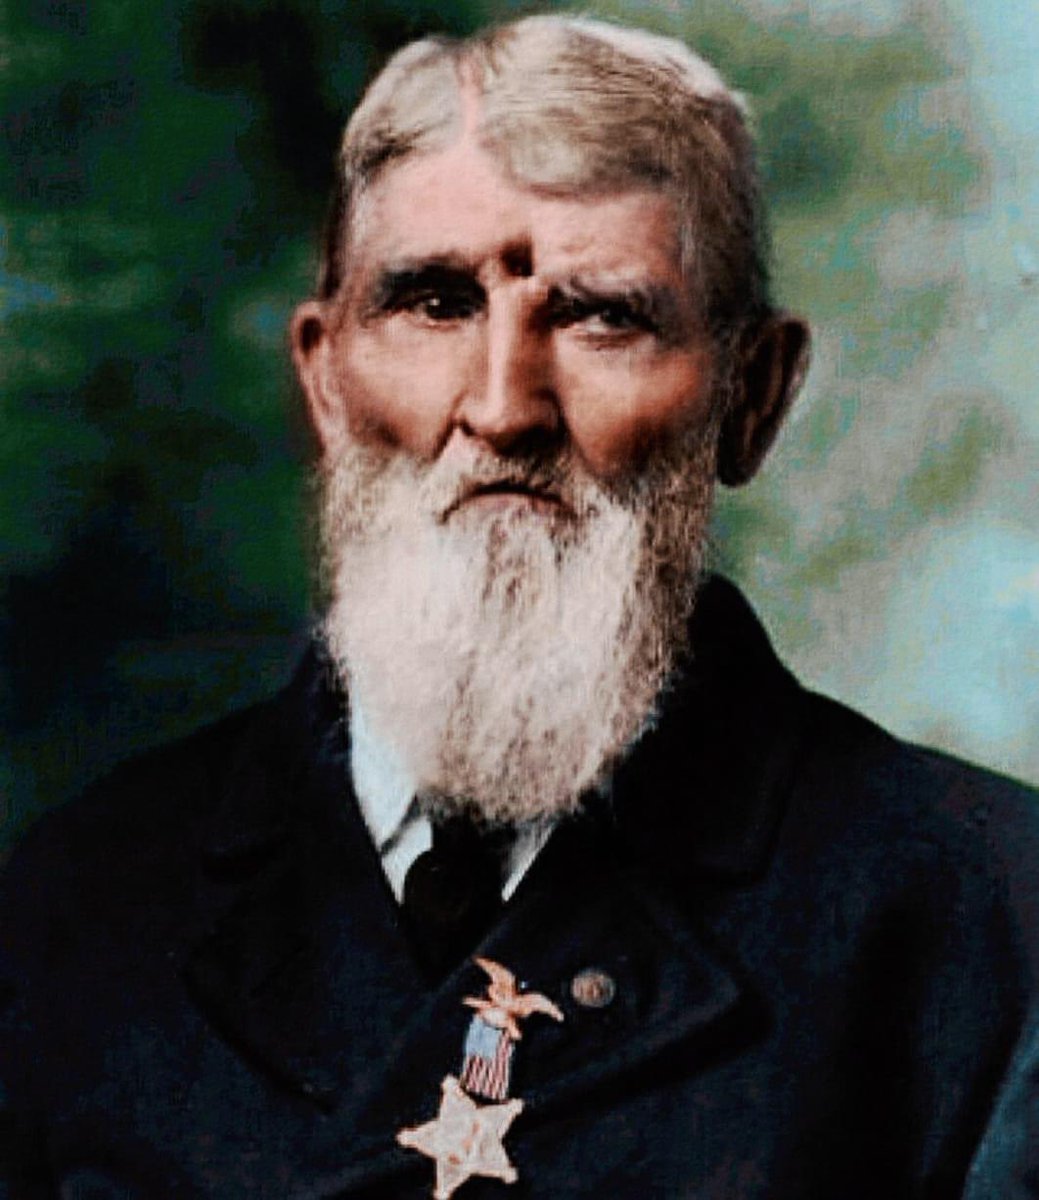 Pictured here is American Civil War veteran Jacob Miller, in 1911, with a bullet hole in his head that he obtained during the Battle of Chickamauga in 1863. Left for the dead, the Union soldier regained consciousness and ended up living for another 54 years. Metal as F.